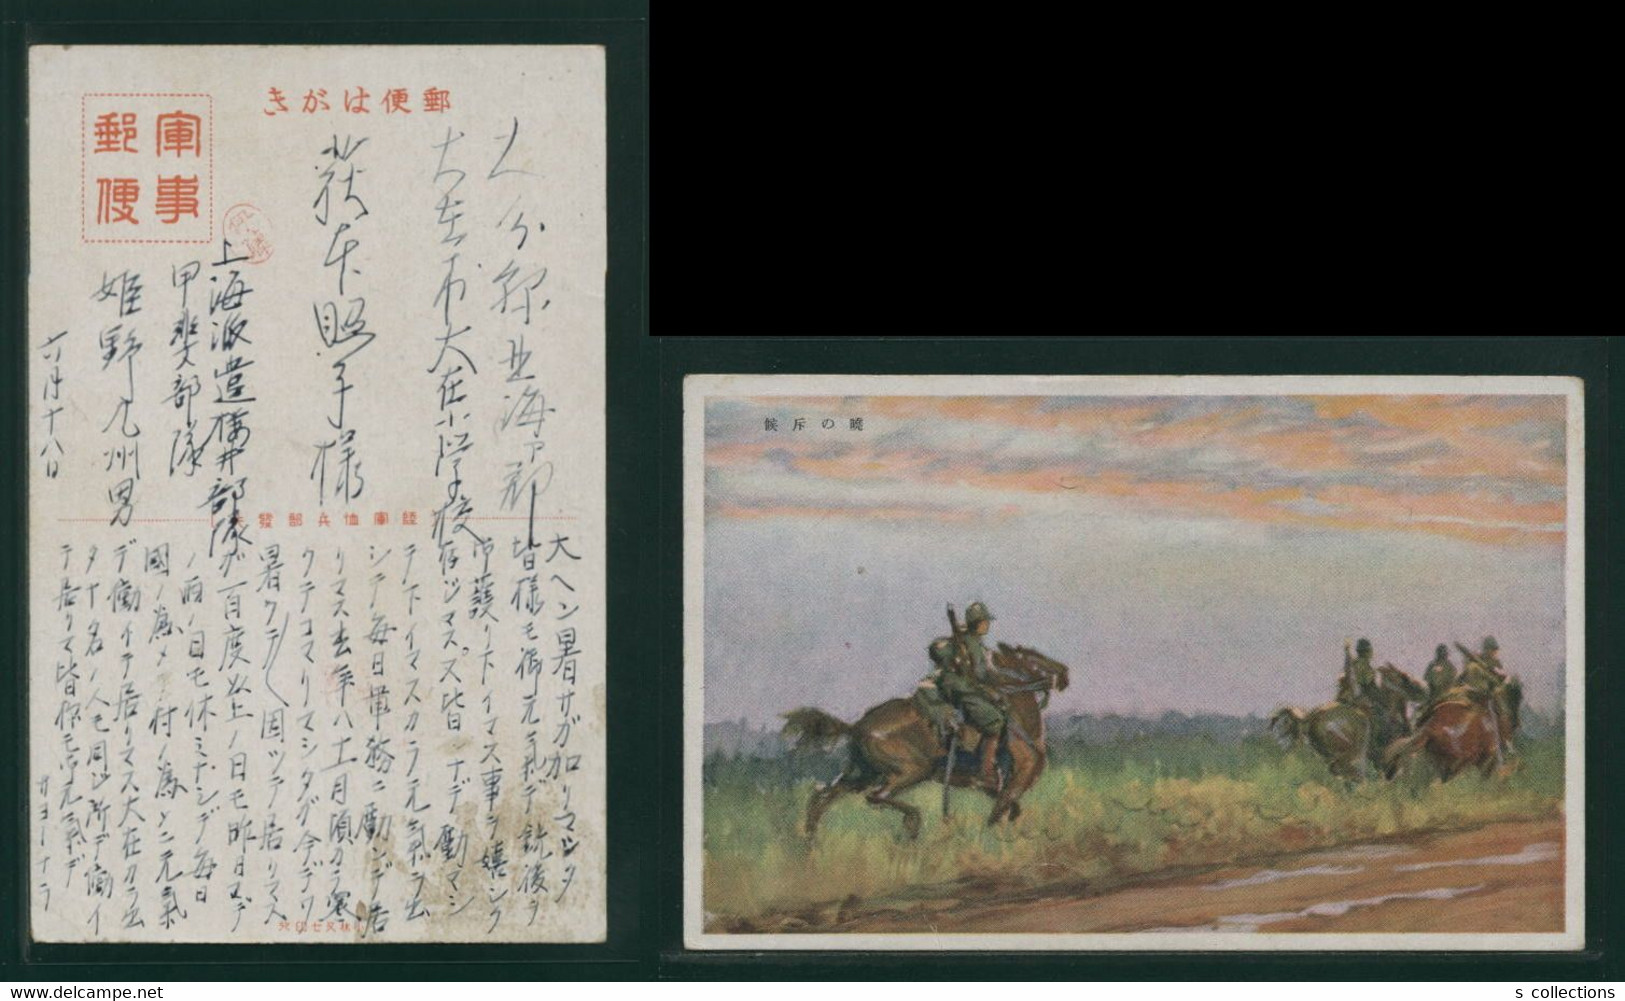 JAPAN WWII Military Japanese Soldier Horse Picture Postcard SHANGHAI China Chine WW2 Japon Gippone - 1943-45 Shanghai & Nankin